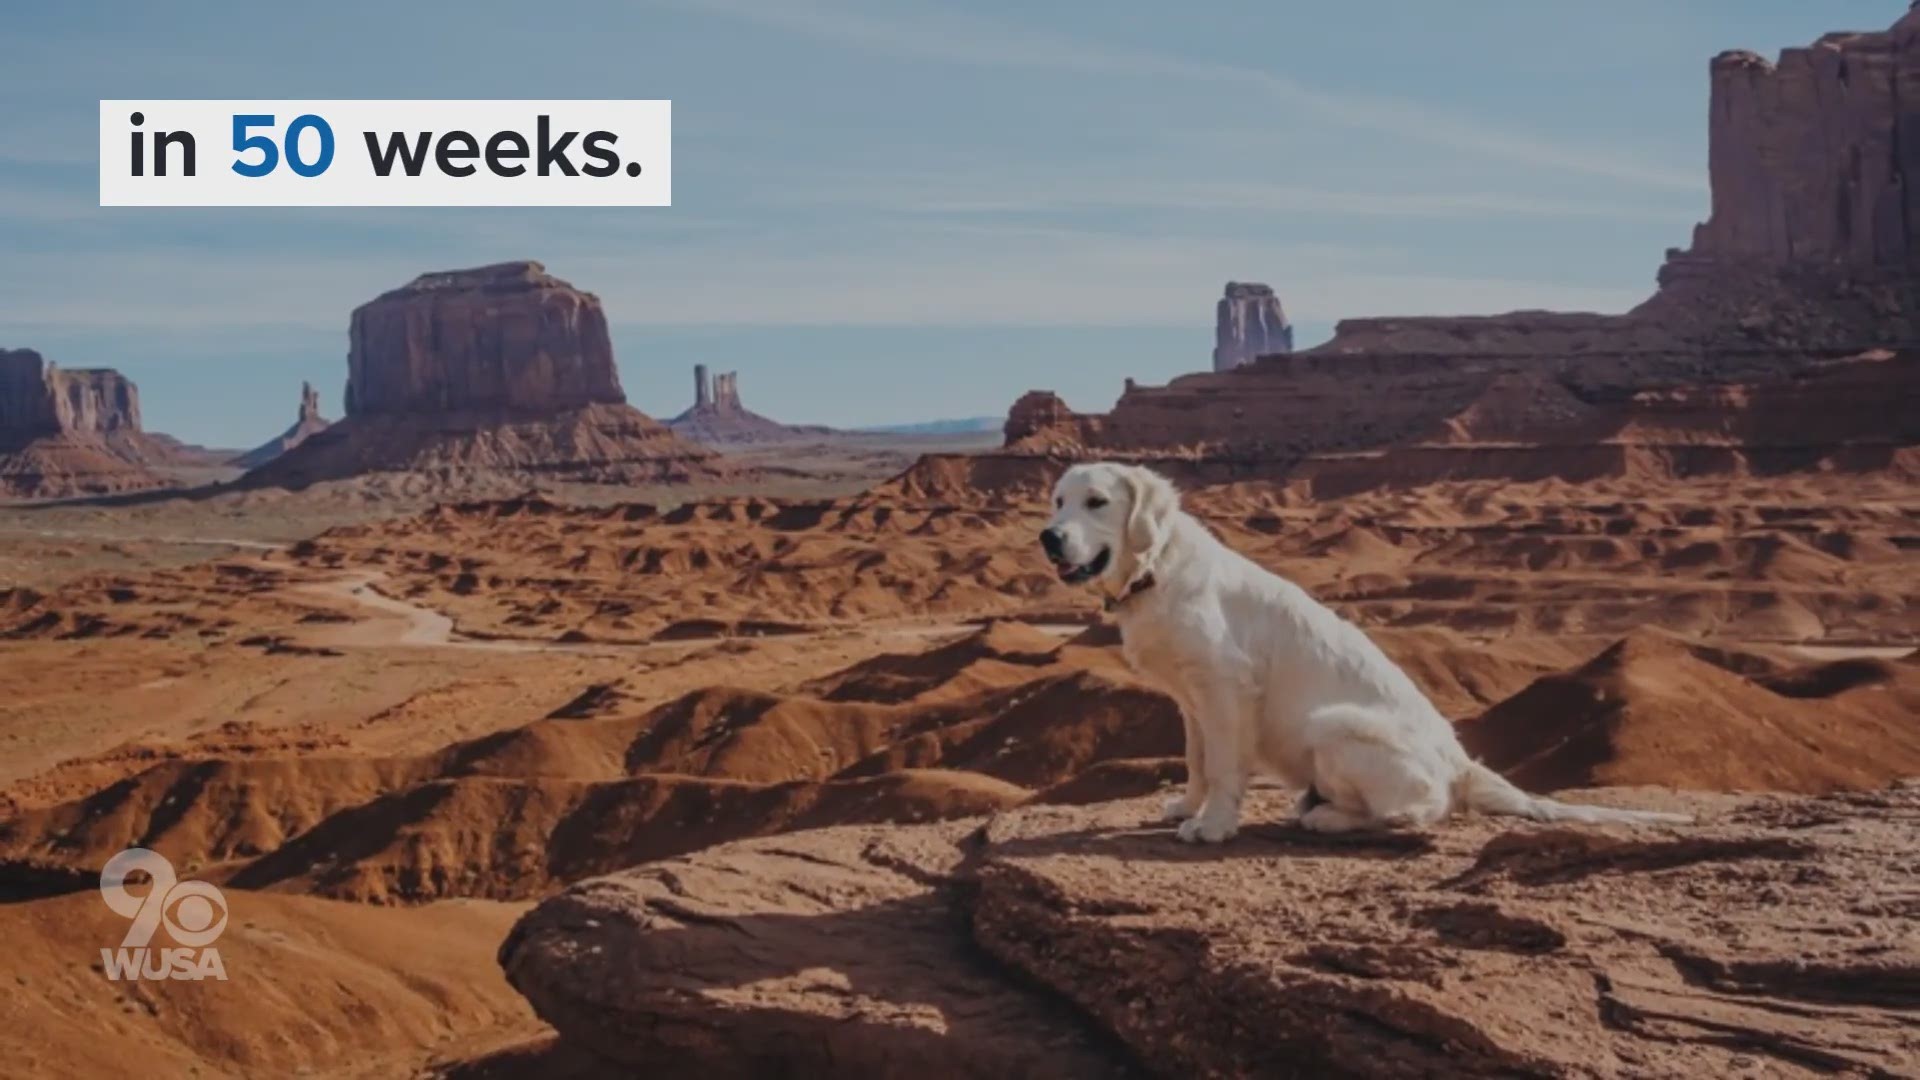 Atlas 'Big Baby' Brown and his owner are traveling across the country for 50 weeks, documenting their journey on Instagram.